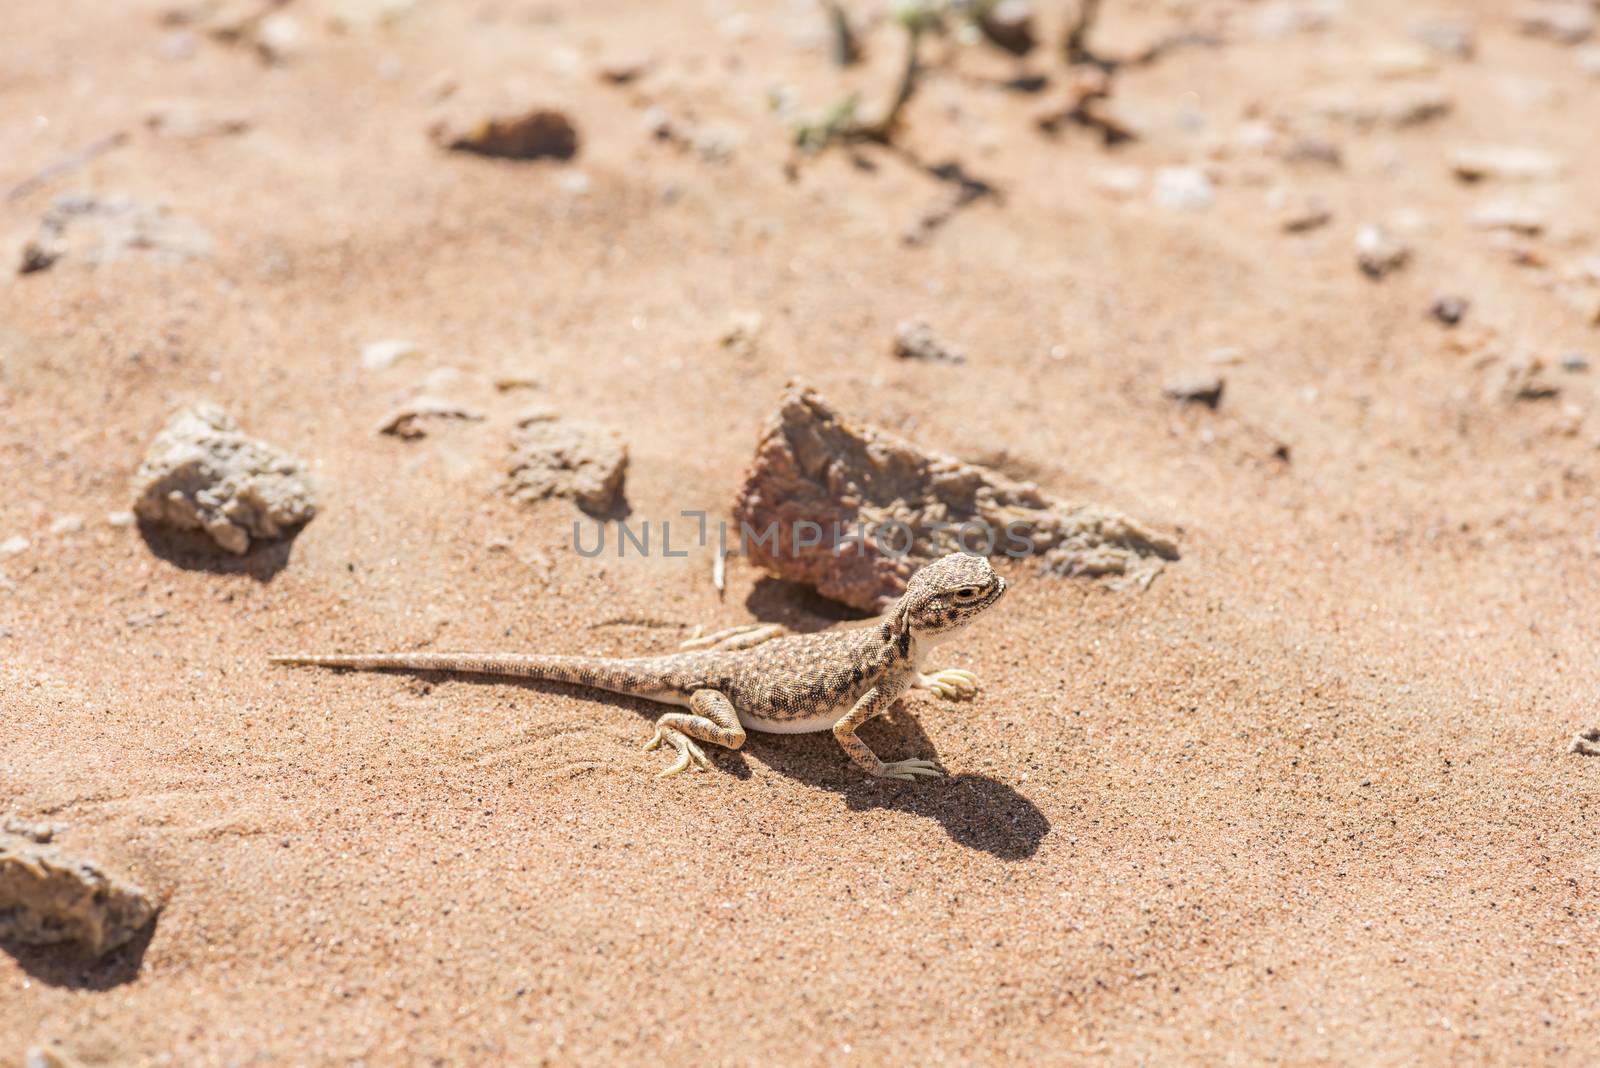 Close-up of Arabian toad-headed agama (Phrynocephalus arabicus) in the Desert, surrounded by sand and few small stones, Sharjah, UAE